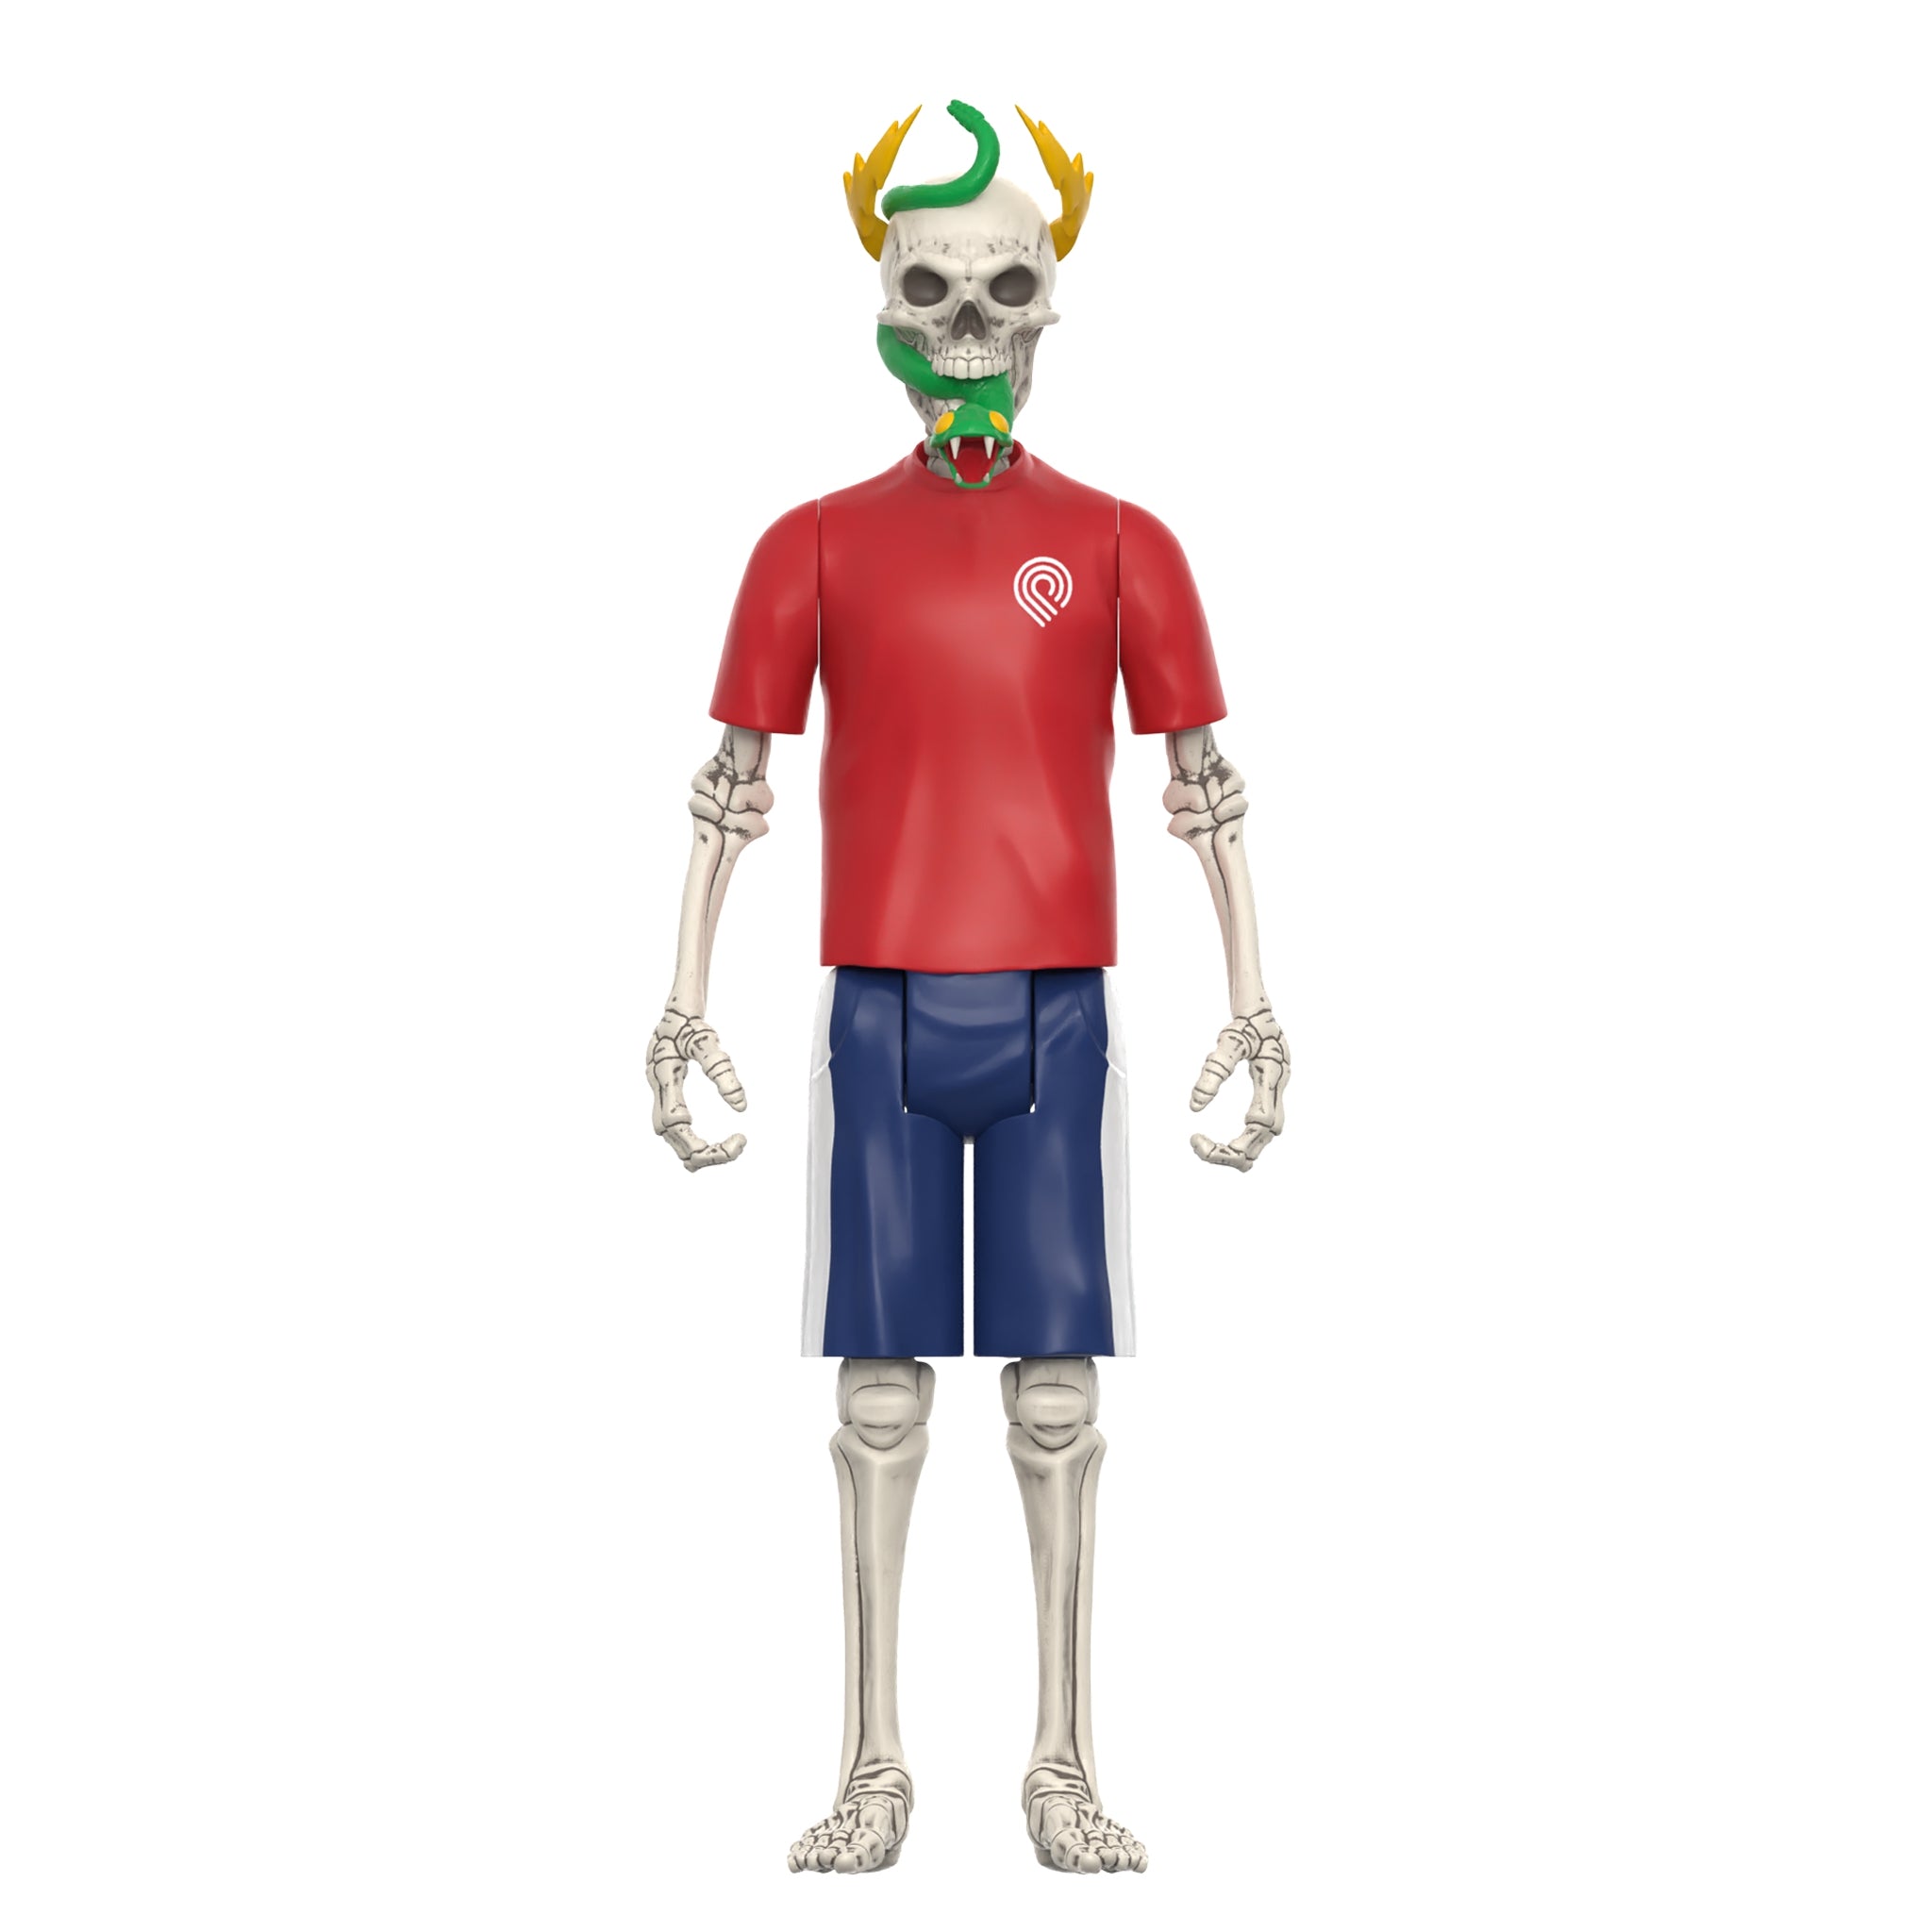 Powell-Peralta ReAction Figure Wave 2 - Mike McGill